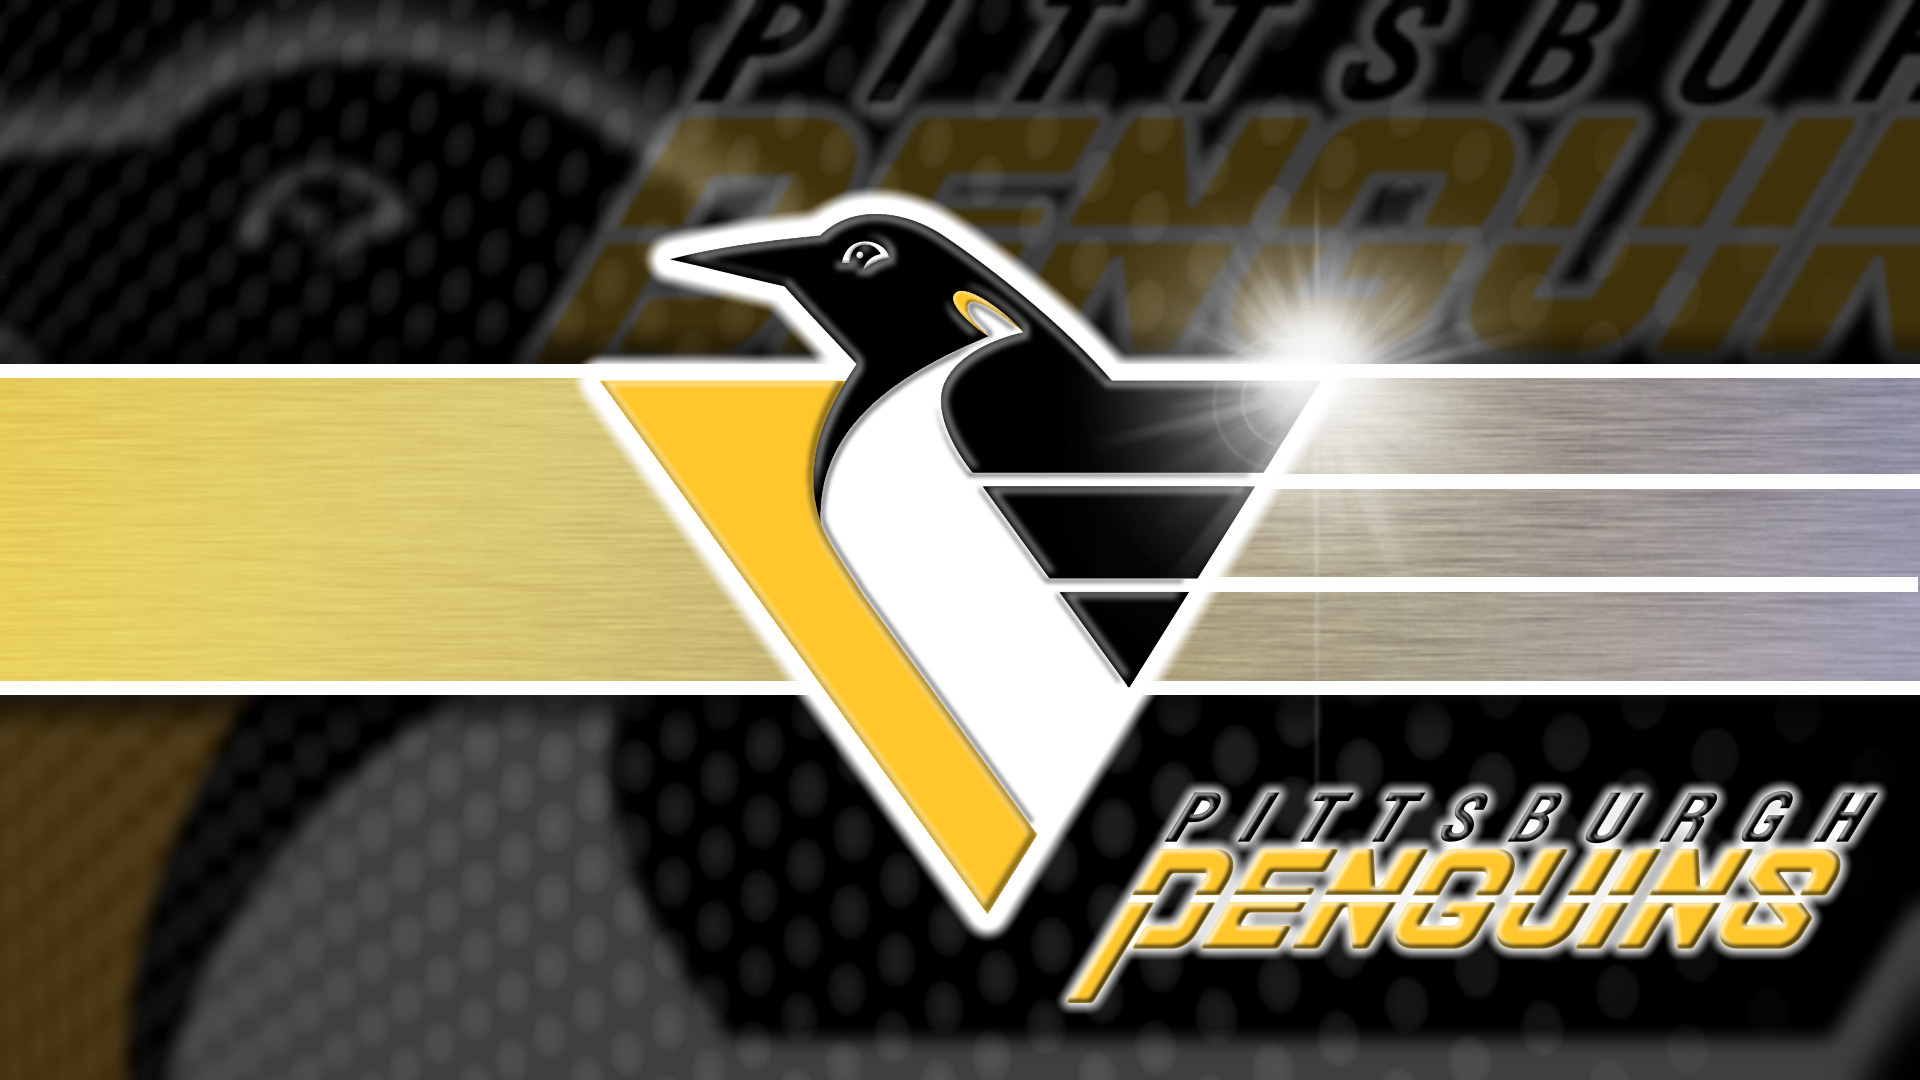 Pittsburgh Penguins 1992 2002 wallpaper by NASCARFAN160